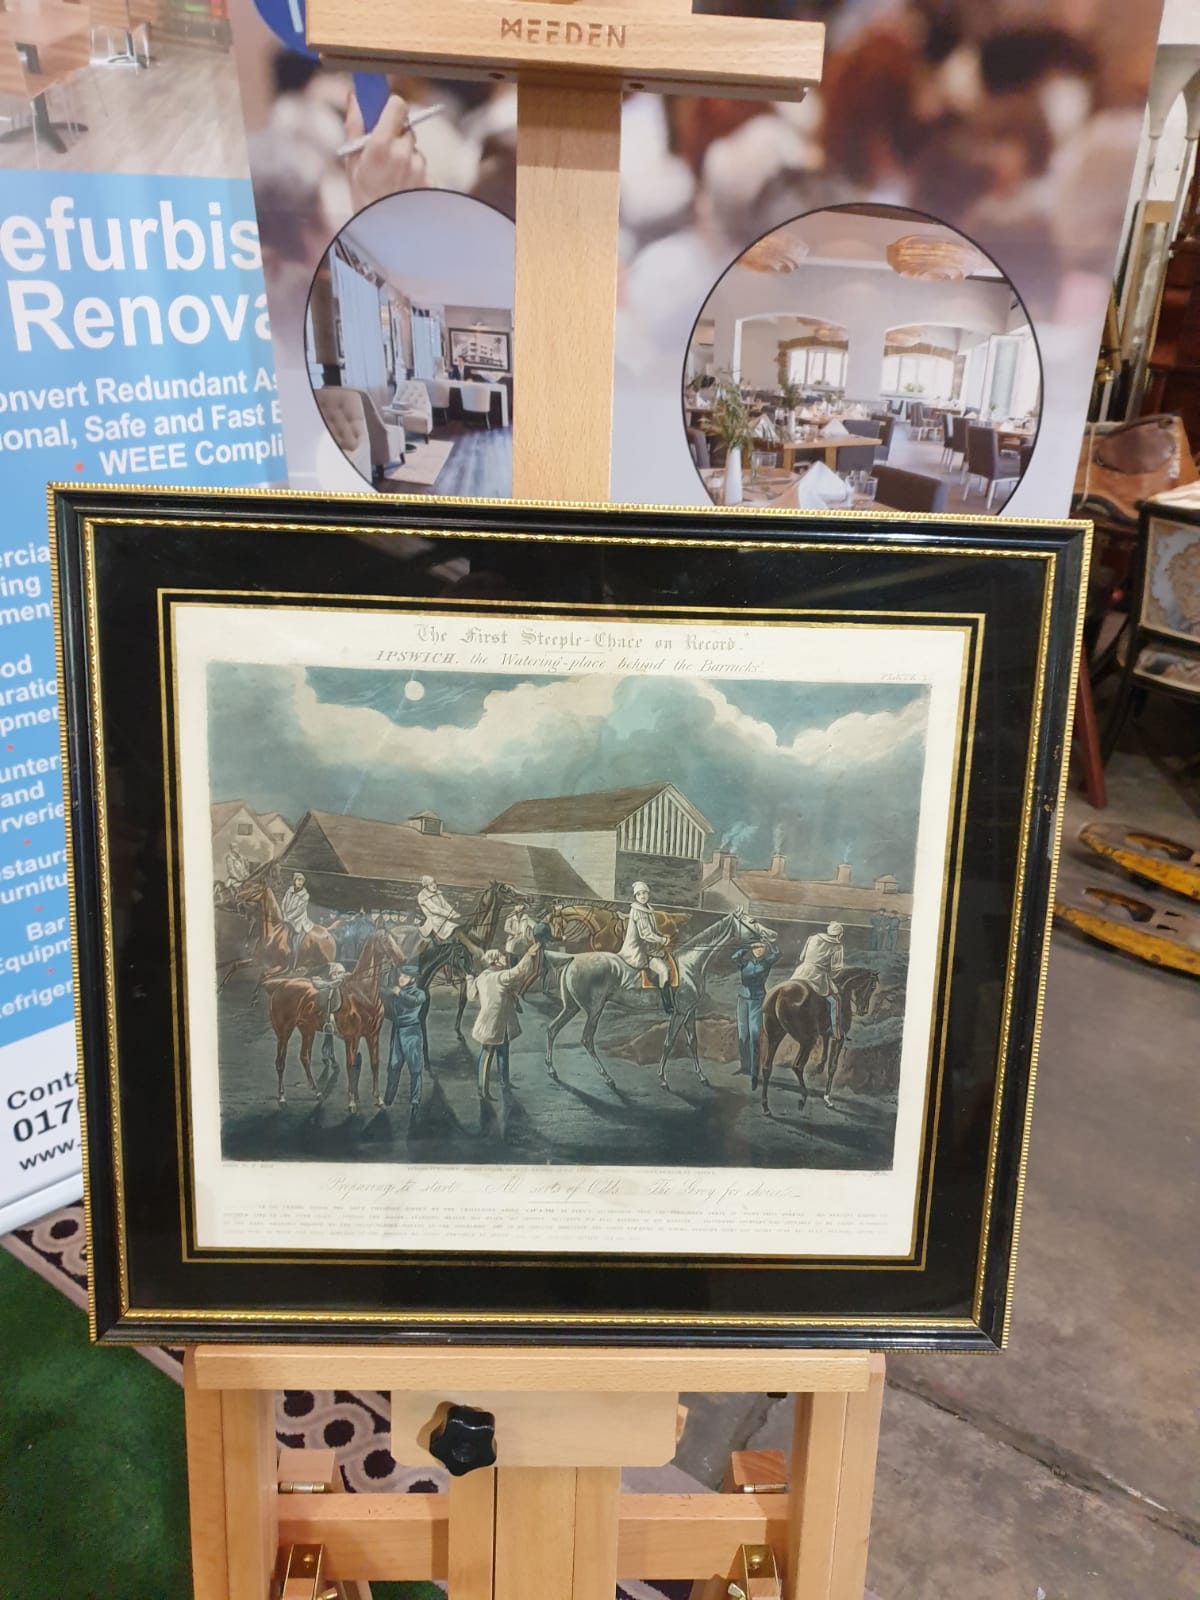 Framed vintage print .The First Steeplechase on Record - Ipswich, the watering place behind the